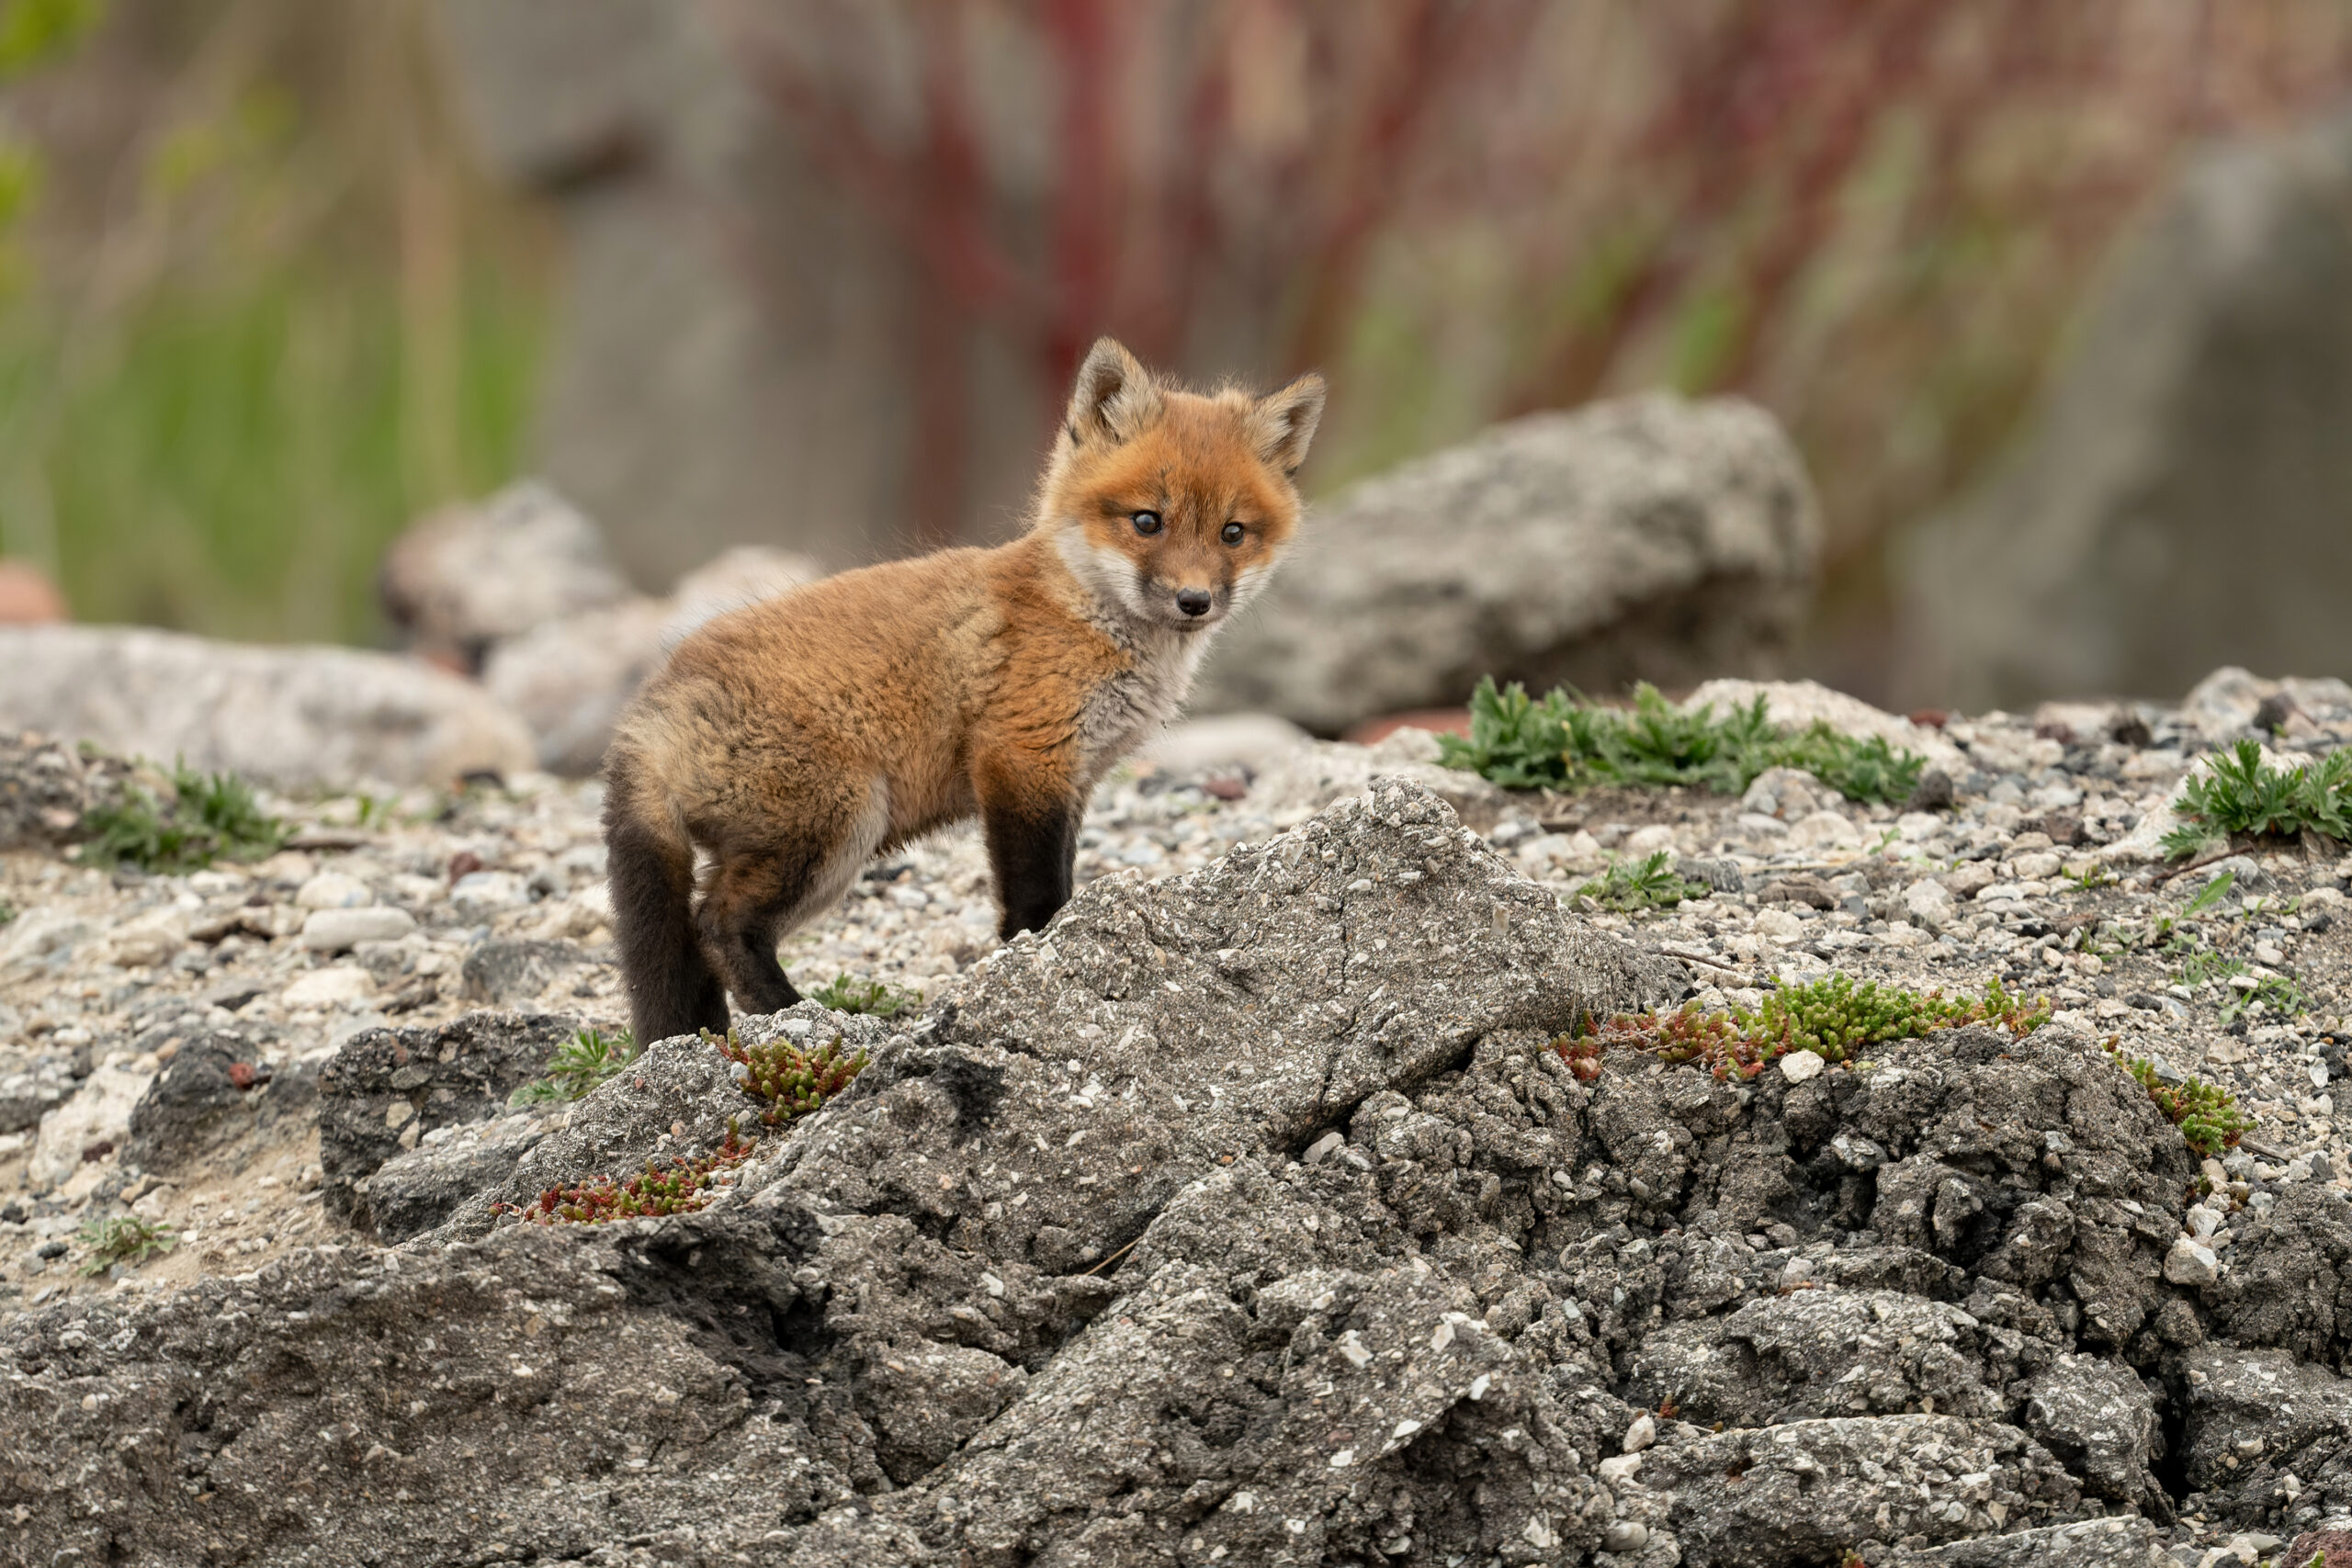 A confident young Red fox (Vulpes vulpes fulva) kit stands outside of its den, in Toronto, Canada